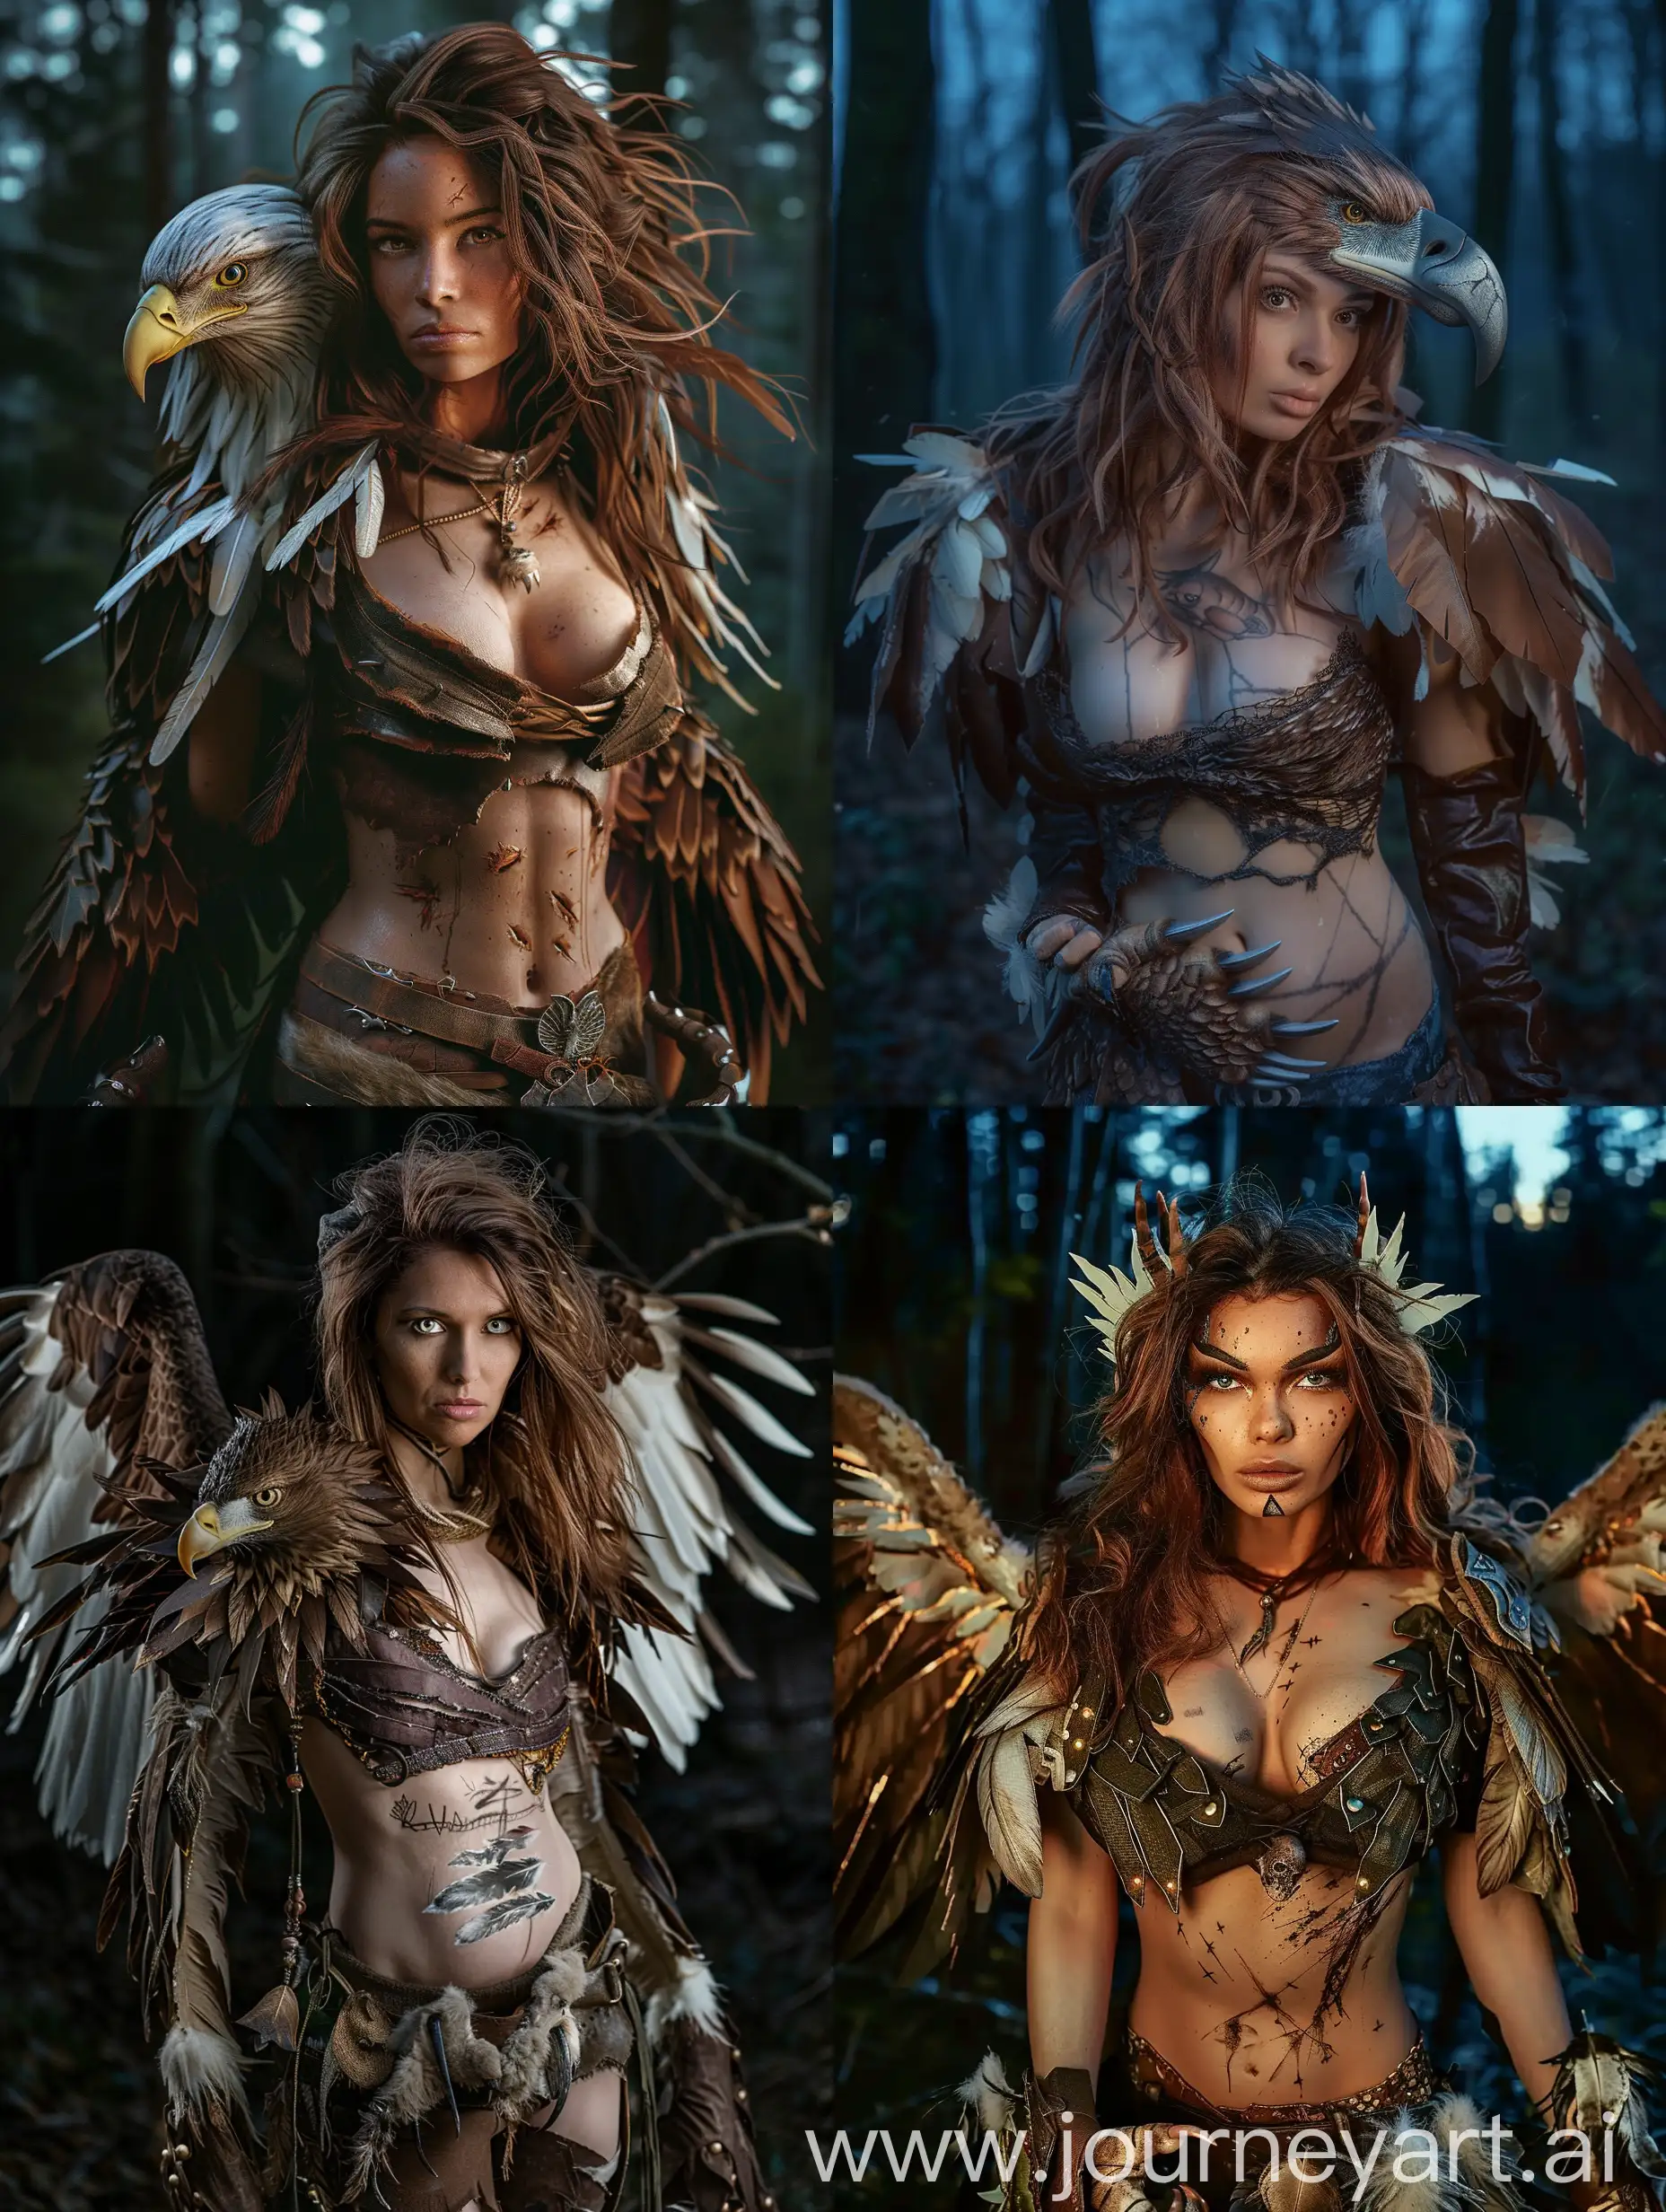 A magical hybrid between a woman and an eagle. She has loose brown hair and a chest. She has a beak, claws, wings and feathers. She is standing in a forest at night. Realistic photograph, full body picture